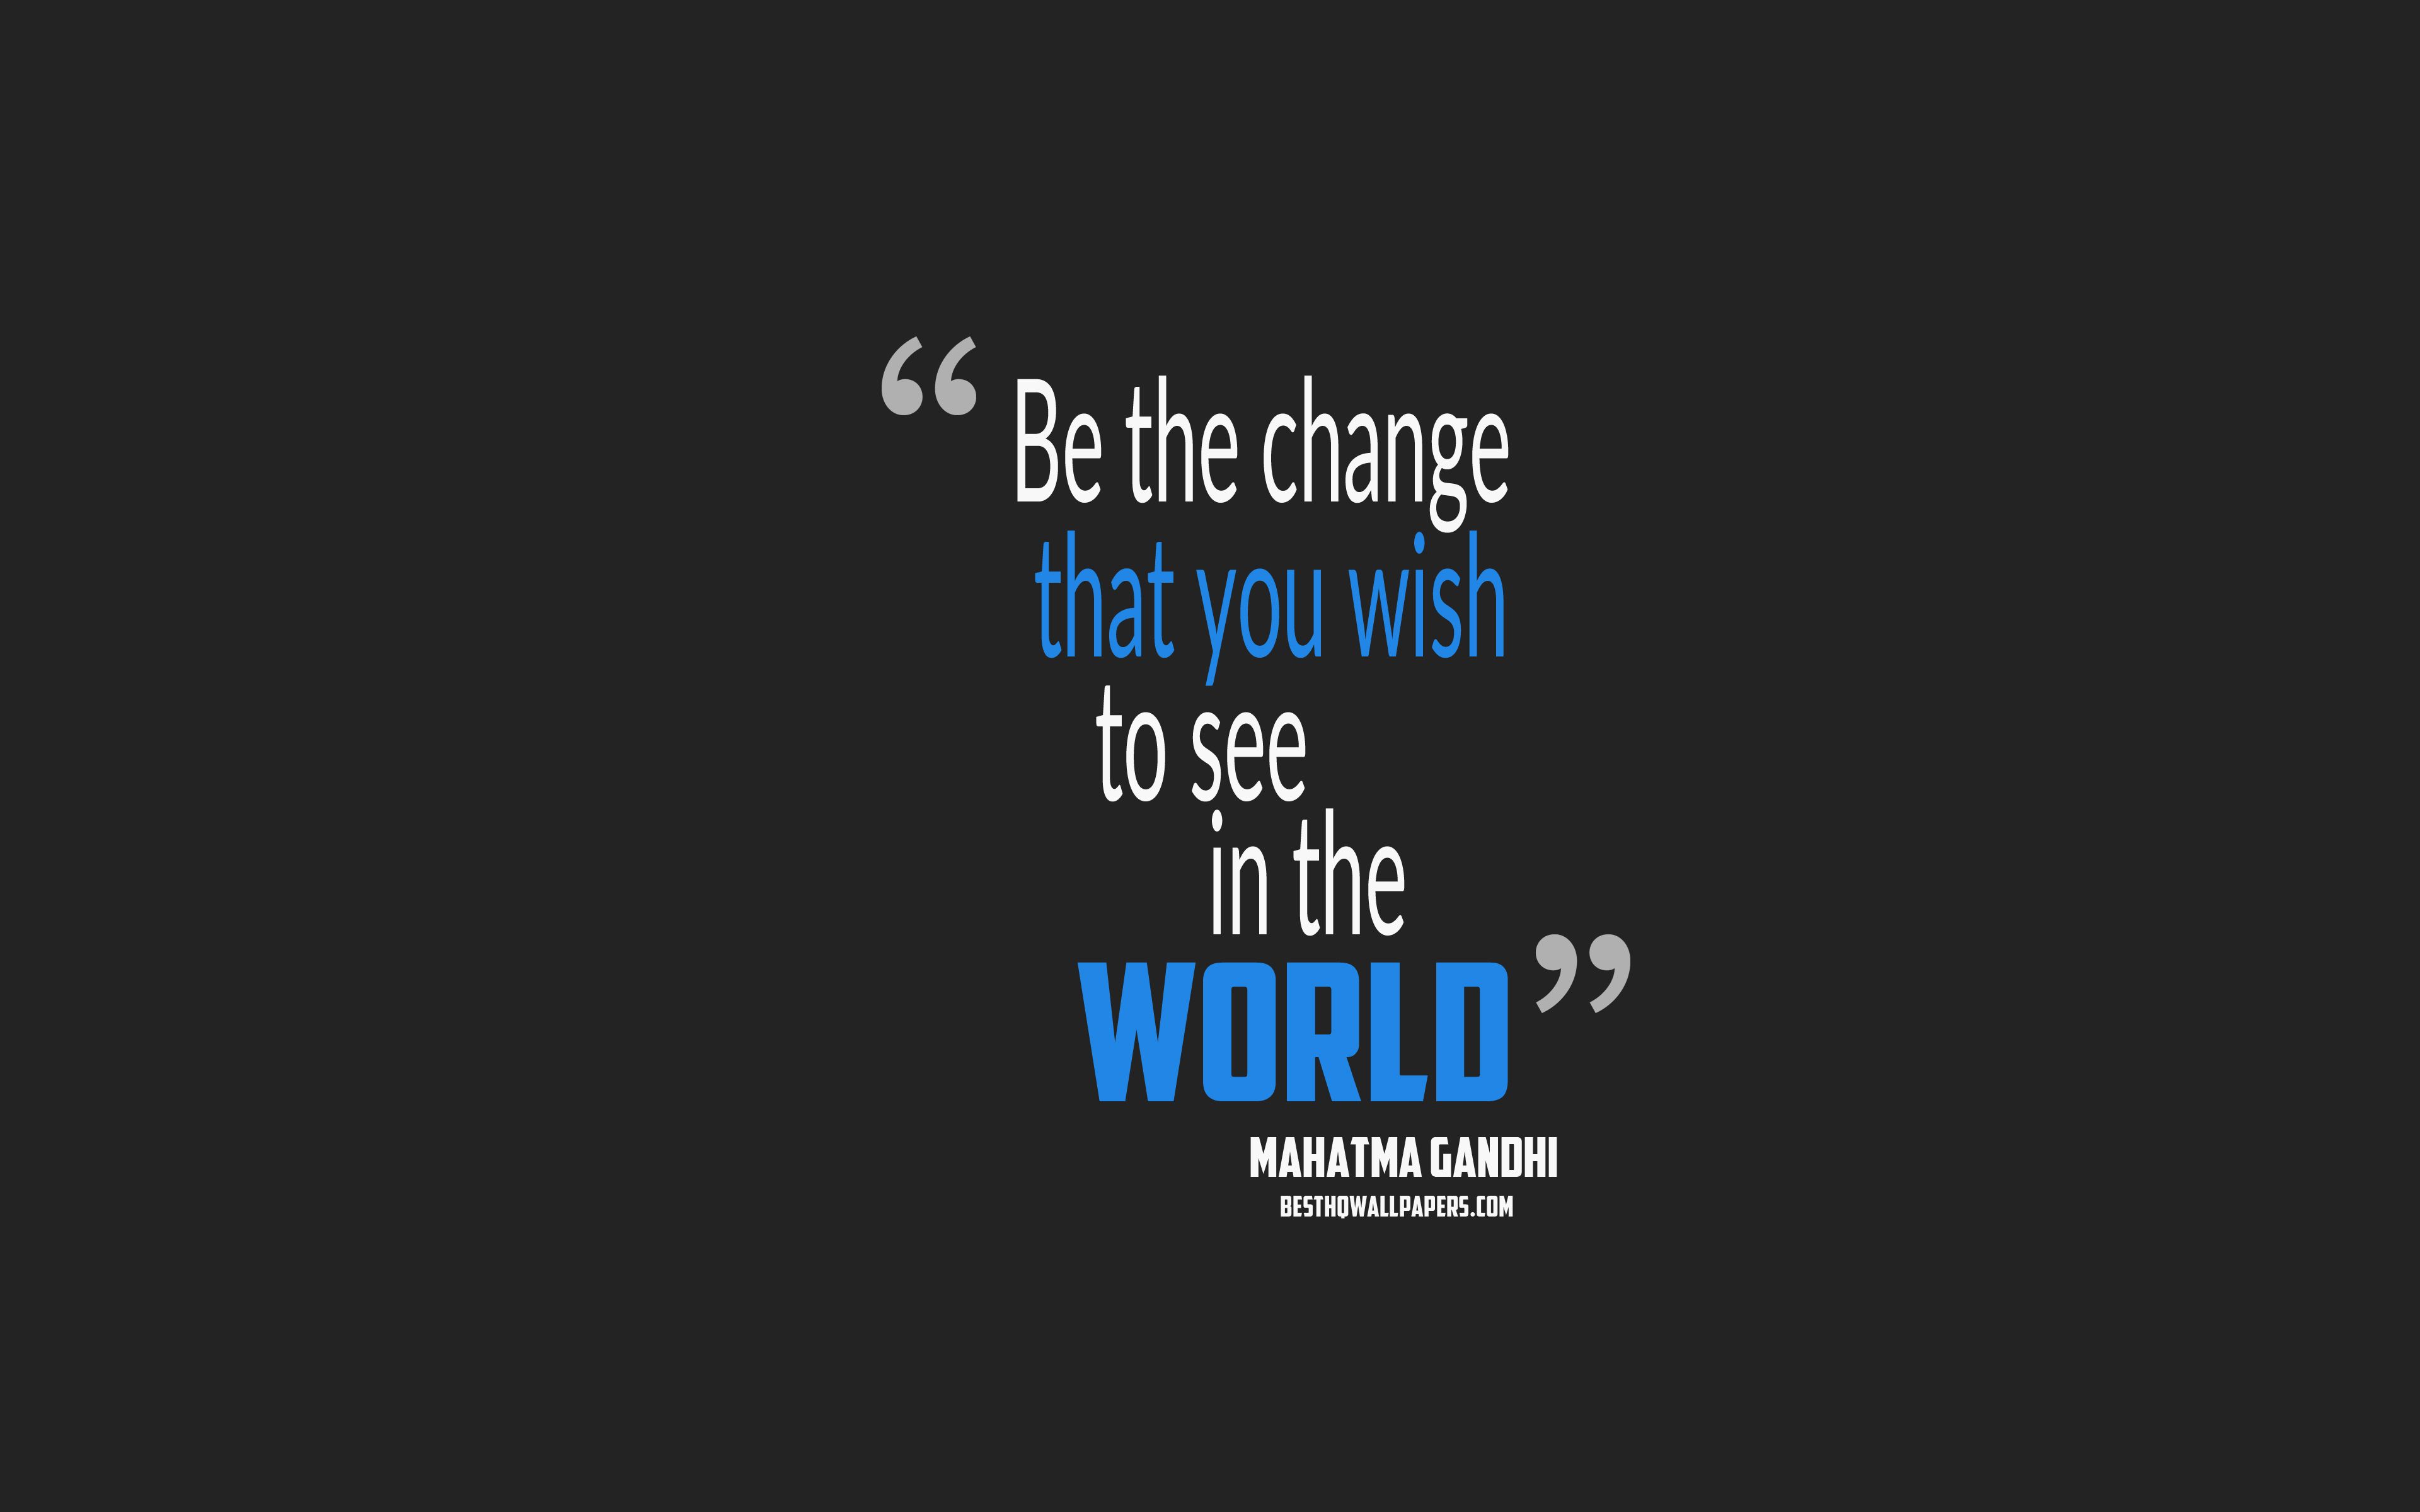 Download wallpaper Be the change that you wish to see in the world, Mahatma Gandhi quotes, minimalism, quotes about the world, motivation, gray background, popular quotes for desktop with resolution 3840x2400. High